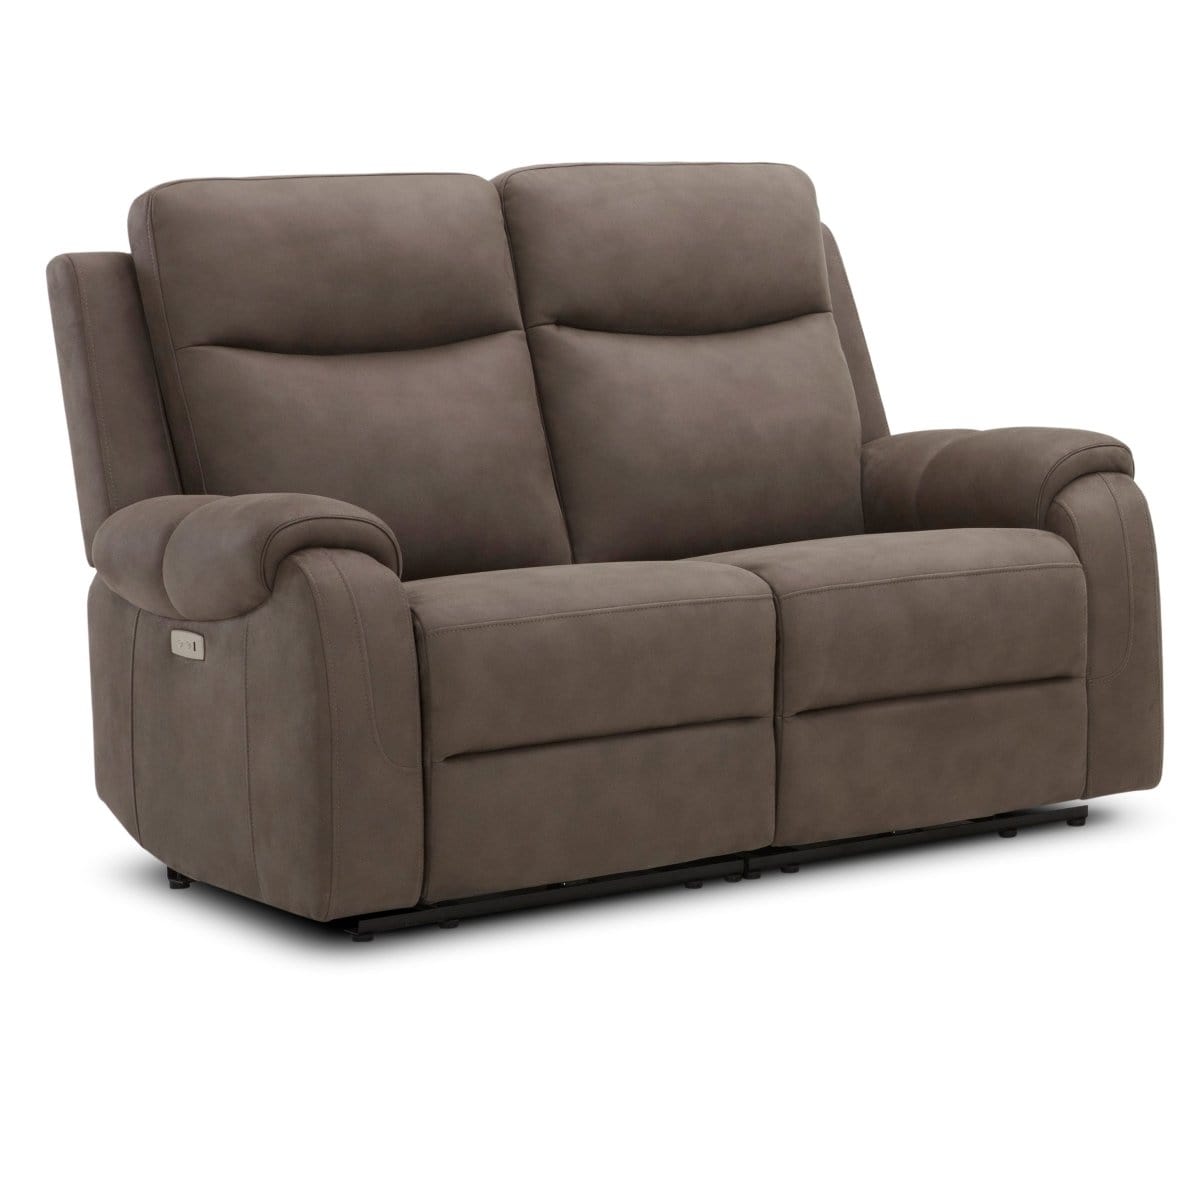 #1   KUKA #KM.5118 Electrical Tessuto-Leather Recliner Sofa 1S/3S (Fabric C-771) picket and rail